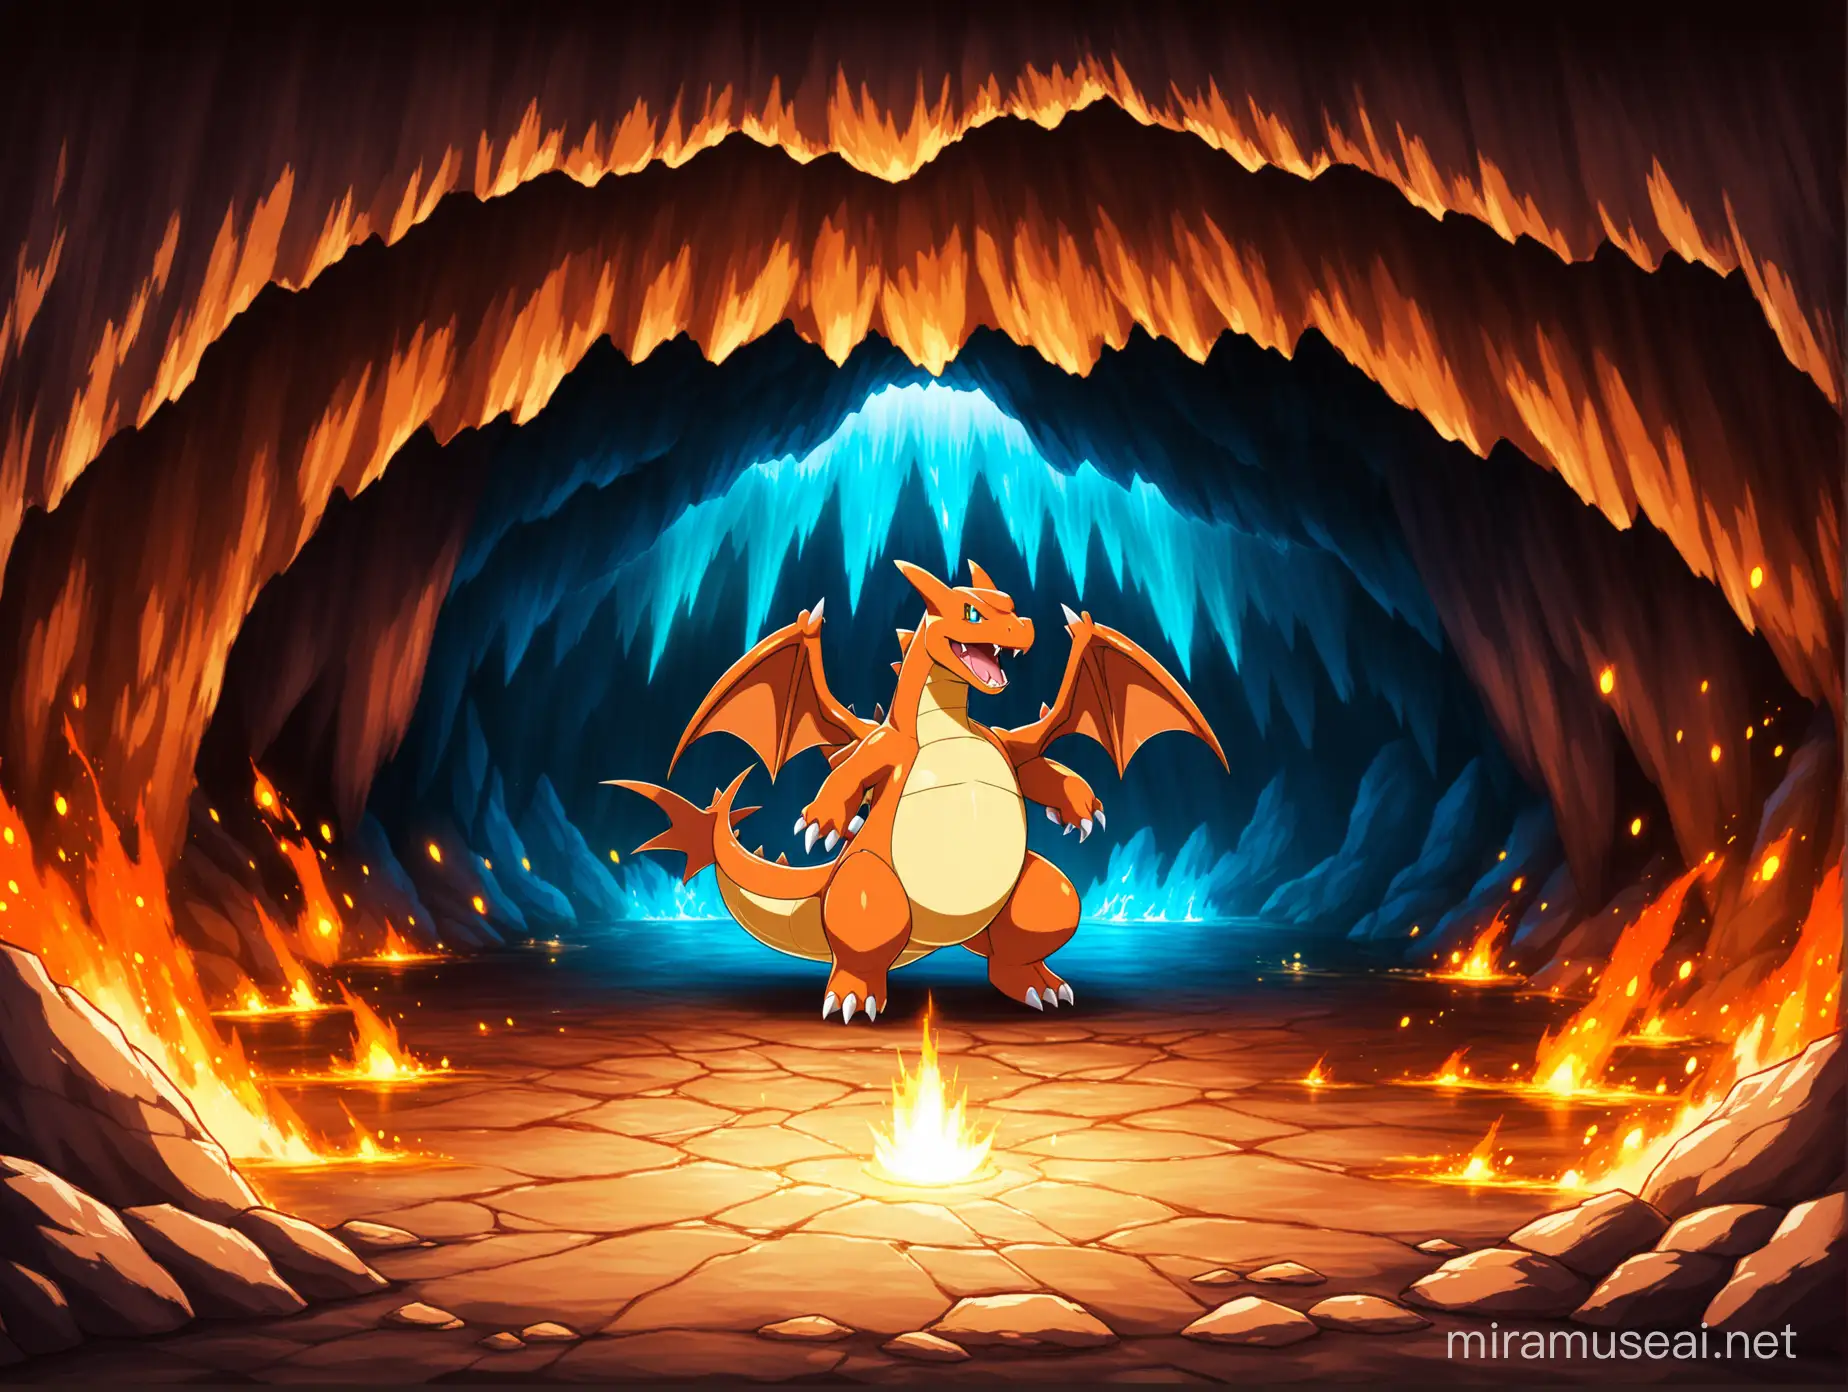 Pokemon Charizard background inside the cave